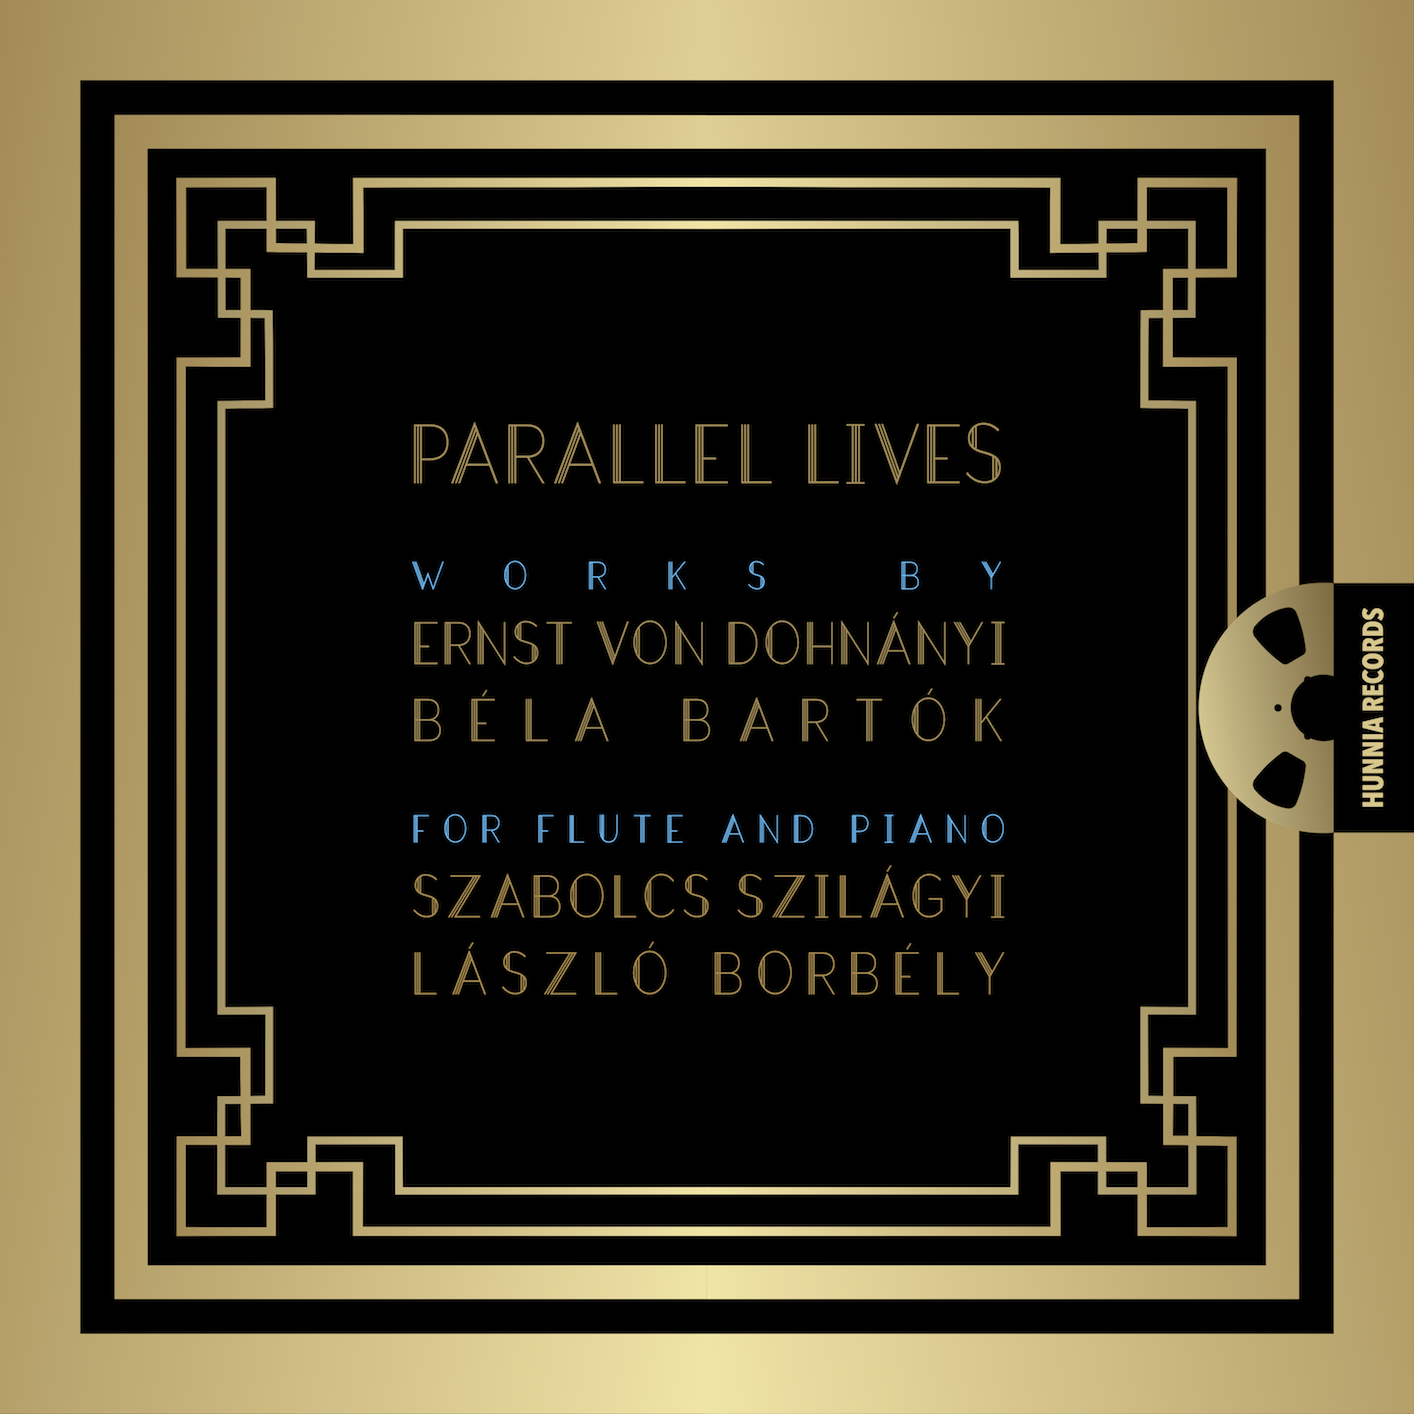 Szabolcs Szilaagyi & Laszlo Borbely – Parallel Lives – Works by Ernst von Dohnanyi and Béla Bartok for flute and piano (2020/2021) [FLAC 24bit/192kHz]